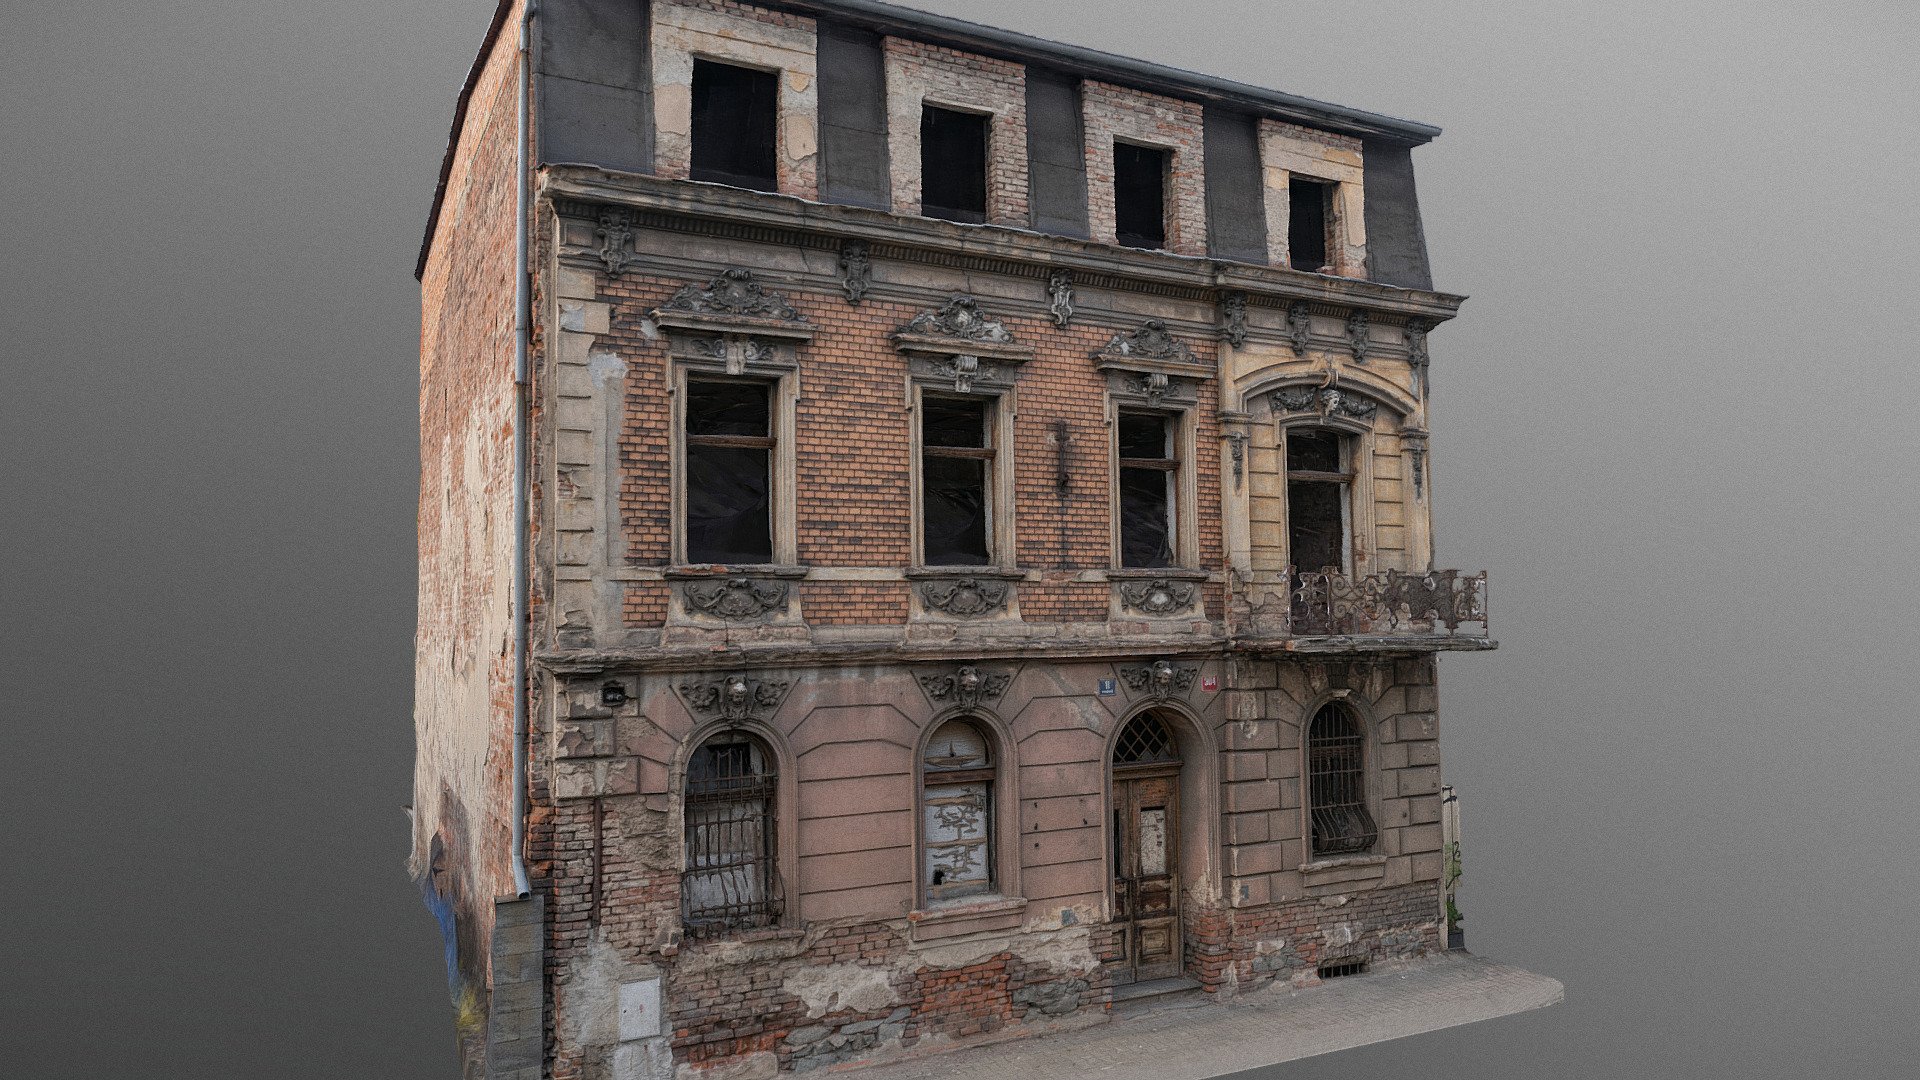 Historic old Early 20th century cupid decorated brick ruined derelict abandoned apartment house building facade scene 3D model - Pekařská 11 street

photogrammetry scan (350x36MP), 5x8K texture +HD normals (as additional .zip) - contact me for source photos or re-exports

impossible to get proper shot from back sadly - Decorated house ruin - Buy Royalty Free 3D model by matousekfoto 3d model